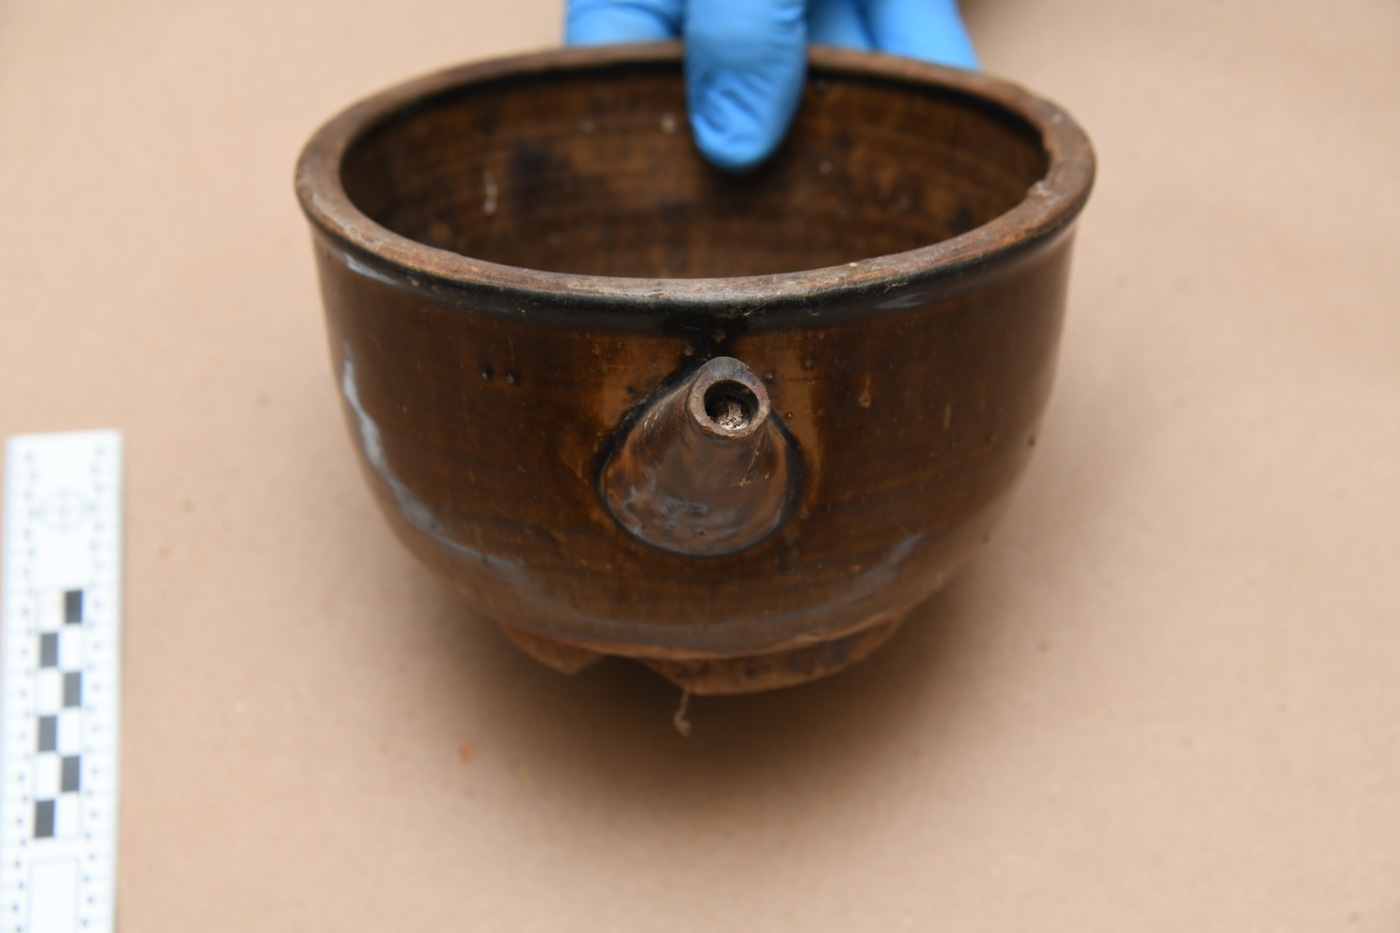 The FBI Boston Division has recovered 22 historic artifacts that were looted following the Battle of Okinawa and has orchestrated their return to the Government of Japan, Okinawa Prefecture. These artifacts had been missing for almost 80 years.